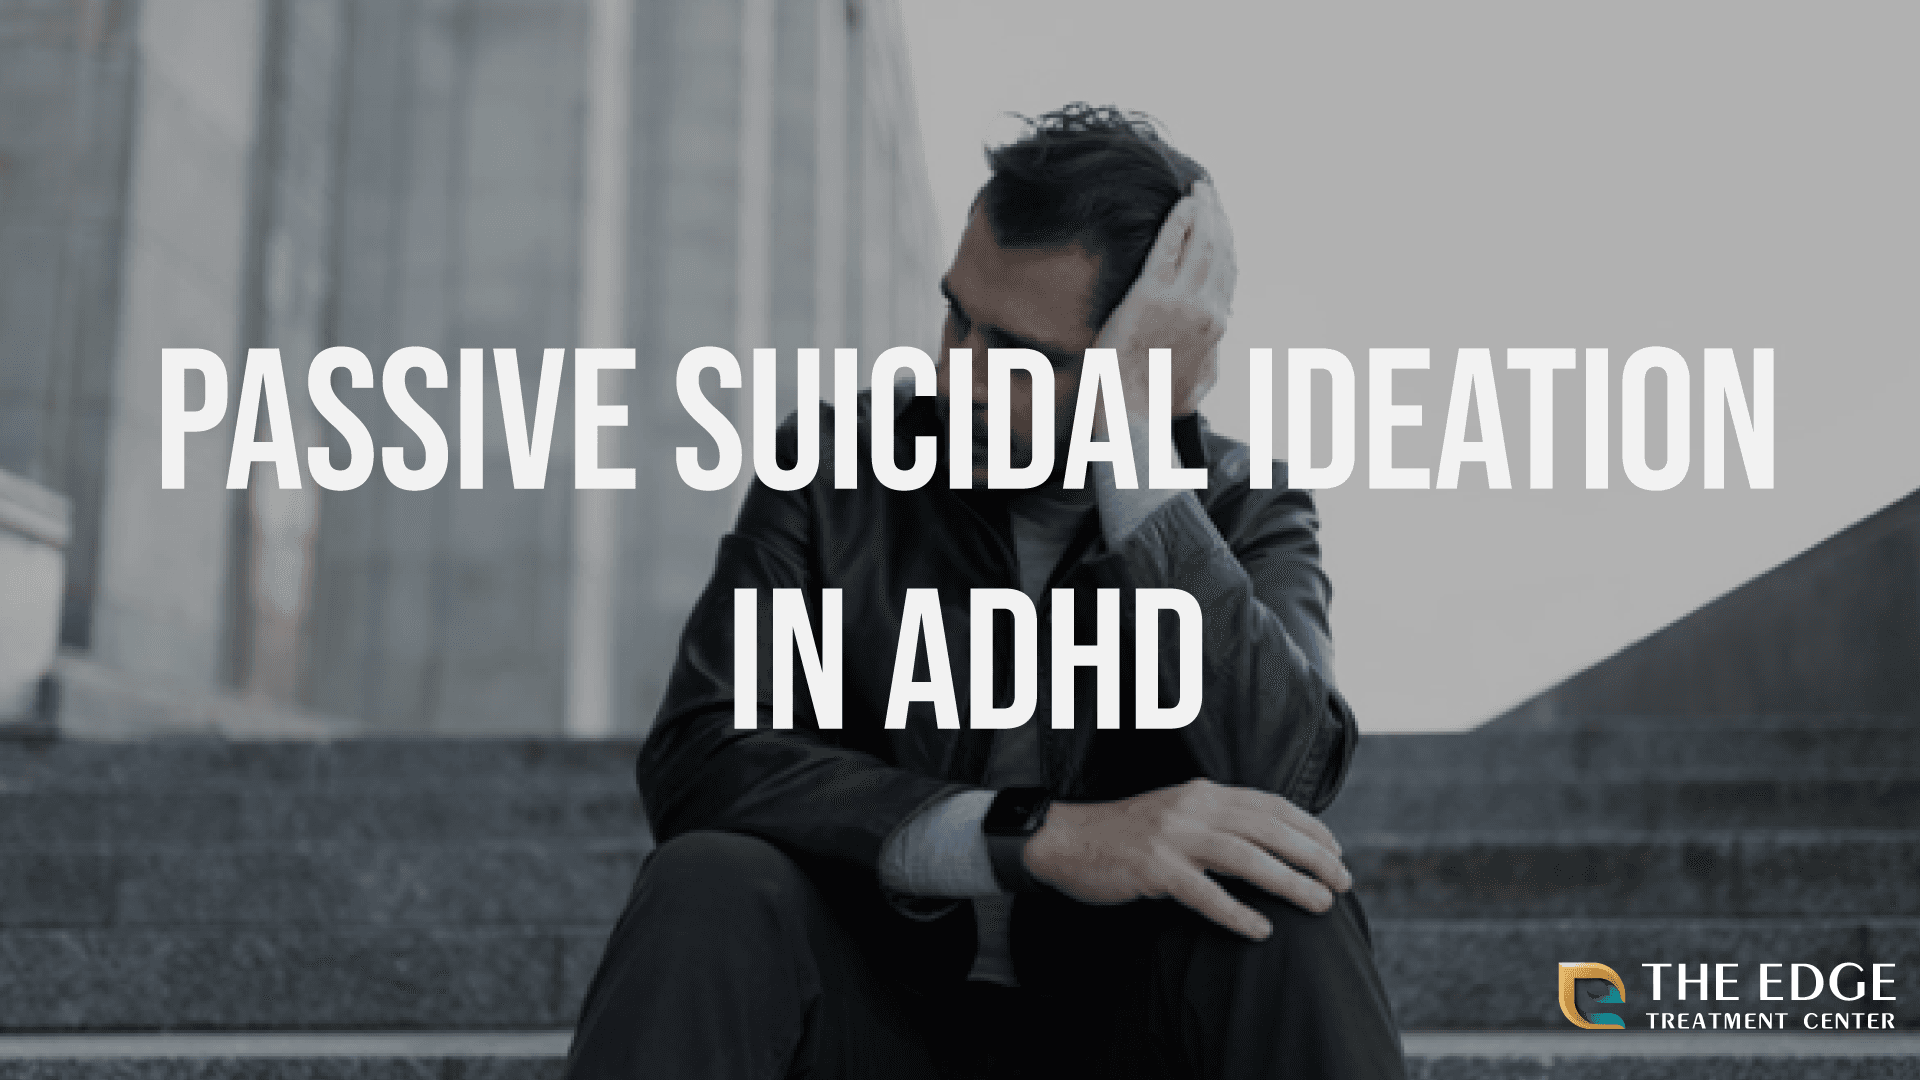 Passive suicidal ideation in ADHD